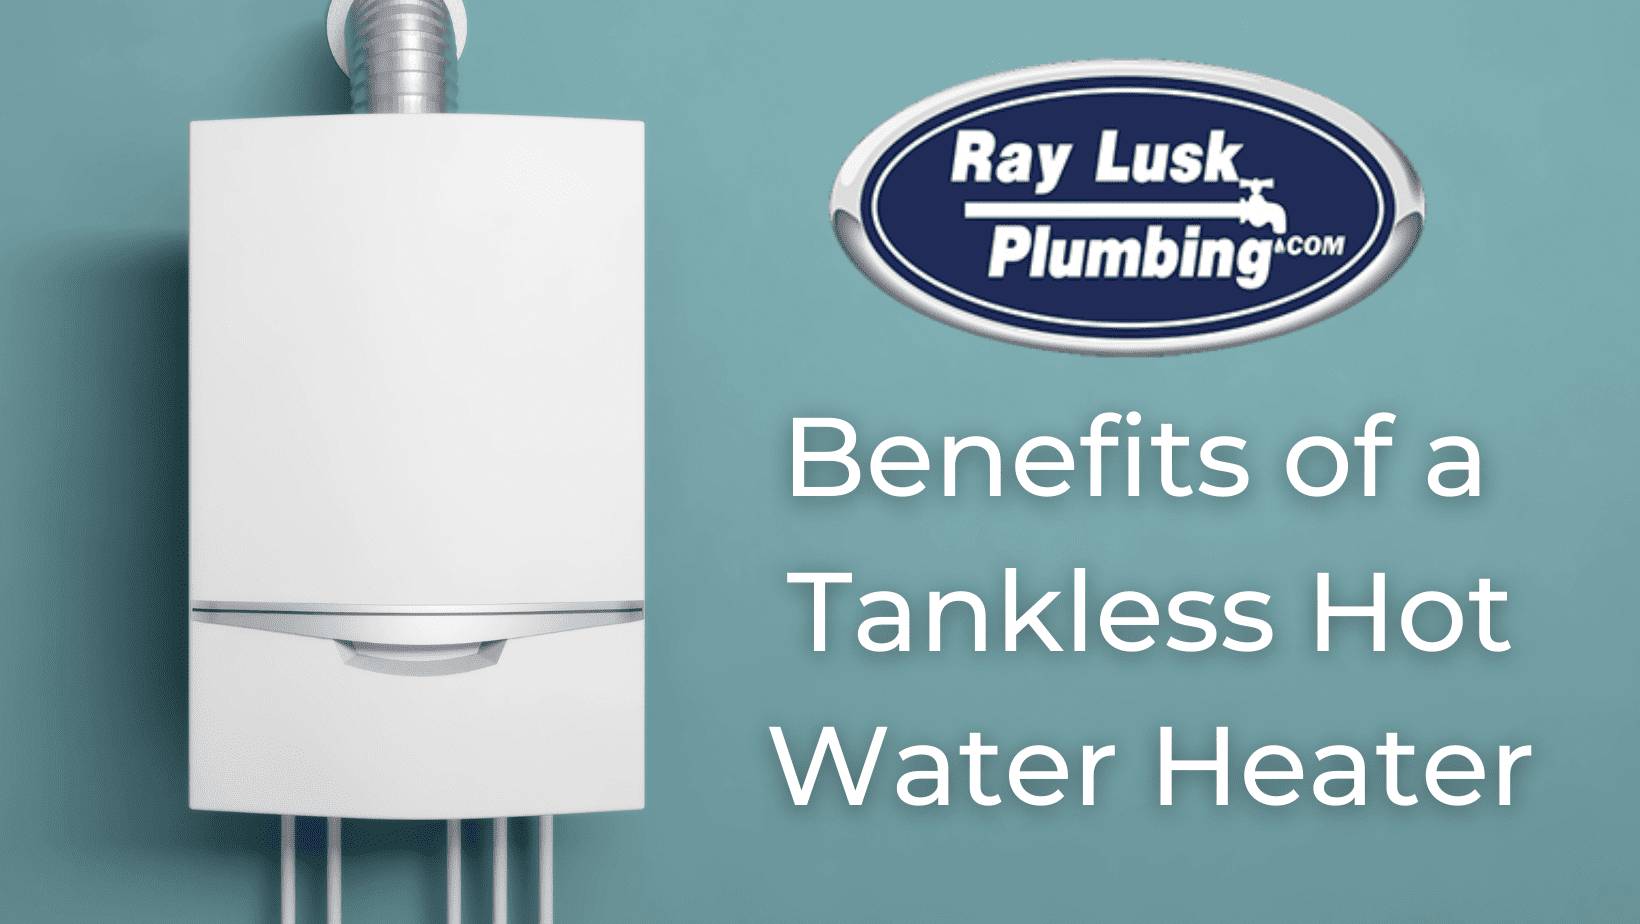 Image text reads: Benefits of a Tankless water heater